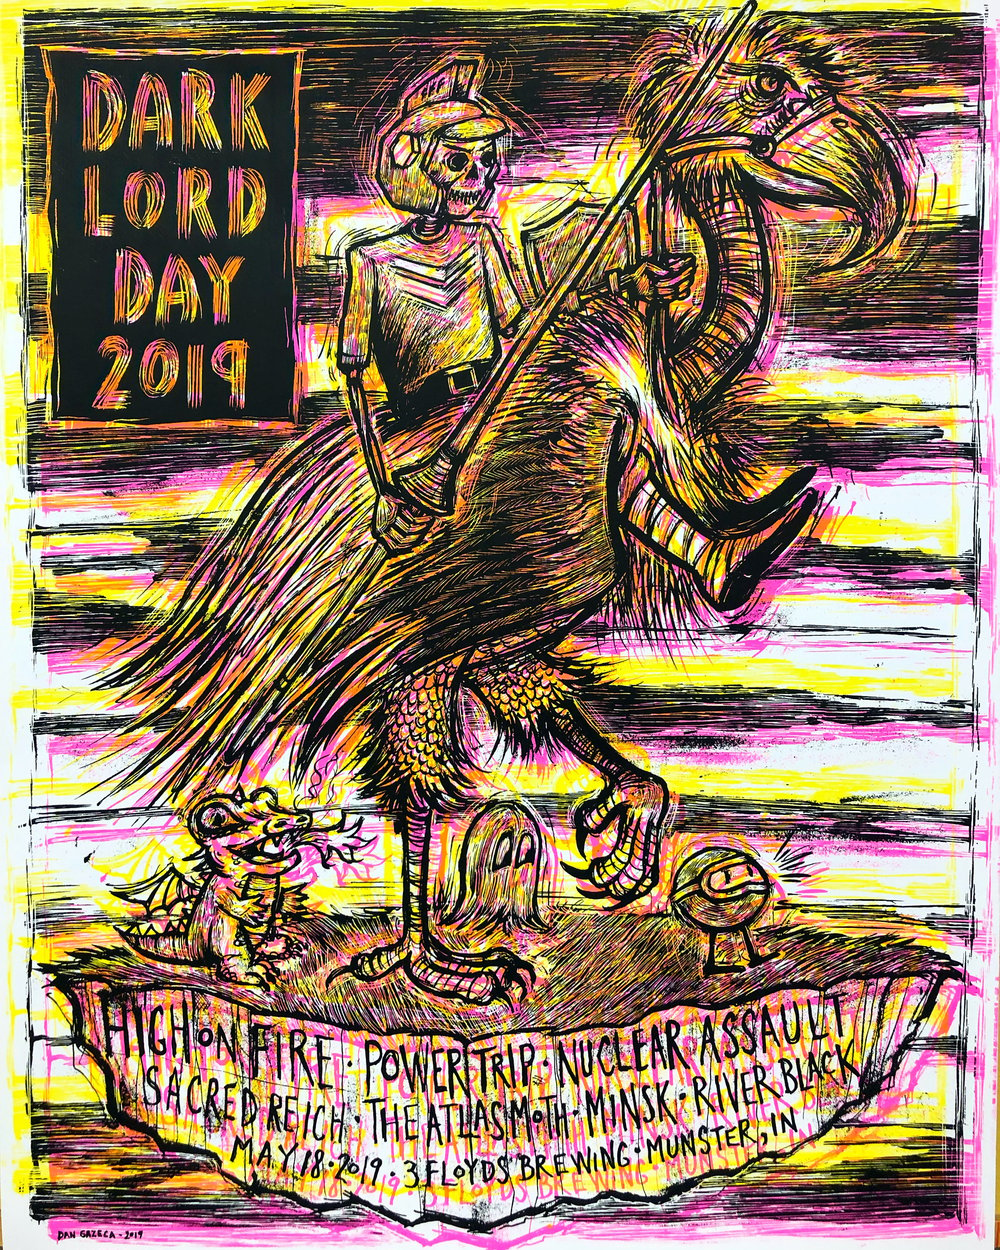 2019 Dark Lord Day poster